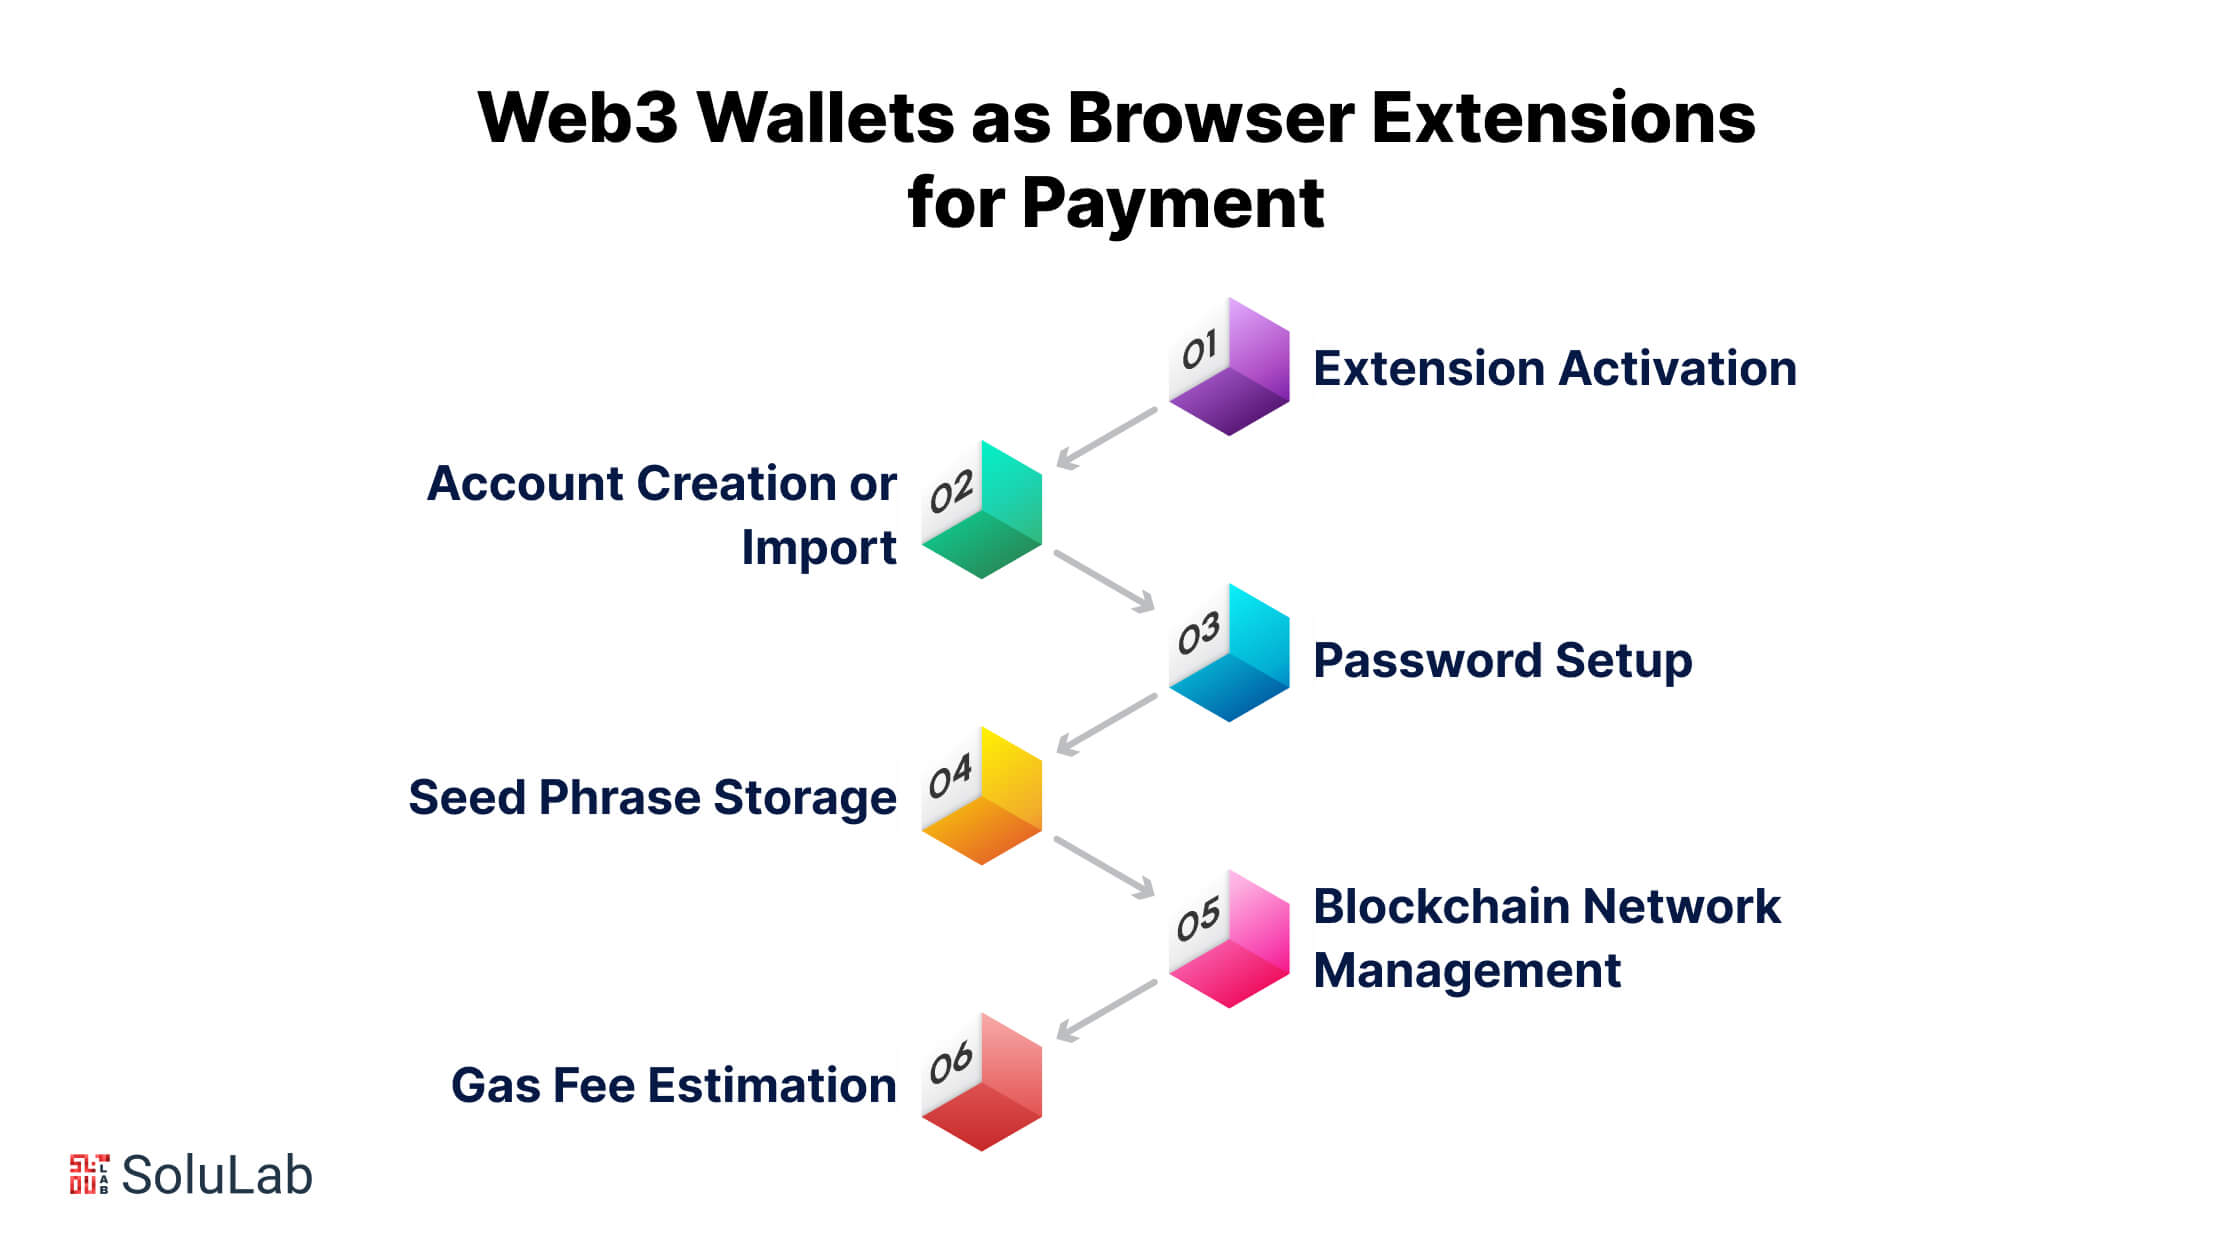 Web3 Wallets as Browser Extensions for Payment